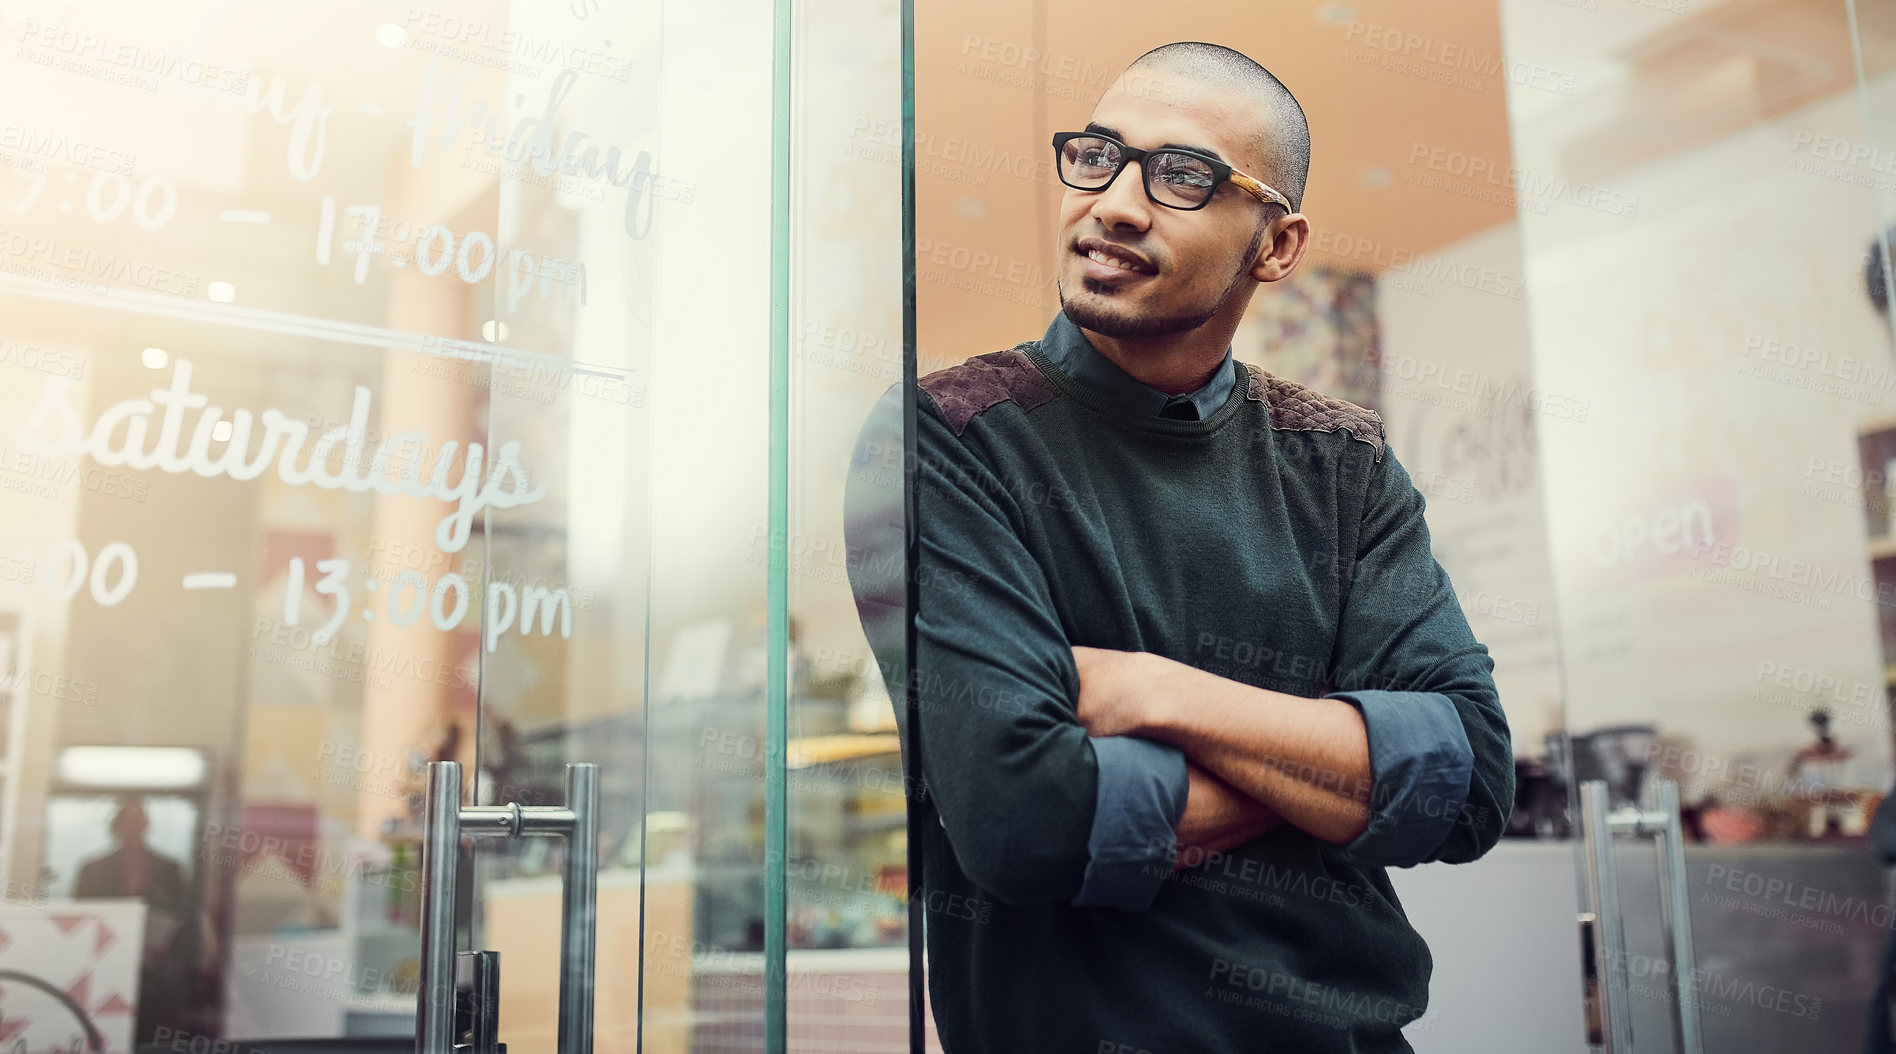 Buy stock photo Shot of a young man standing in the entrance of a cafe